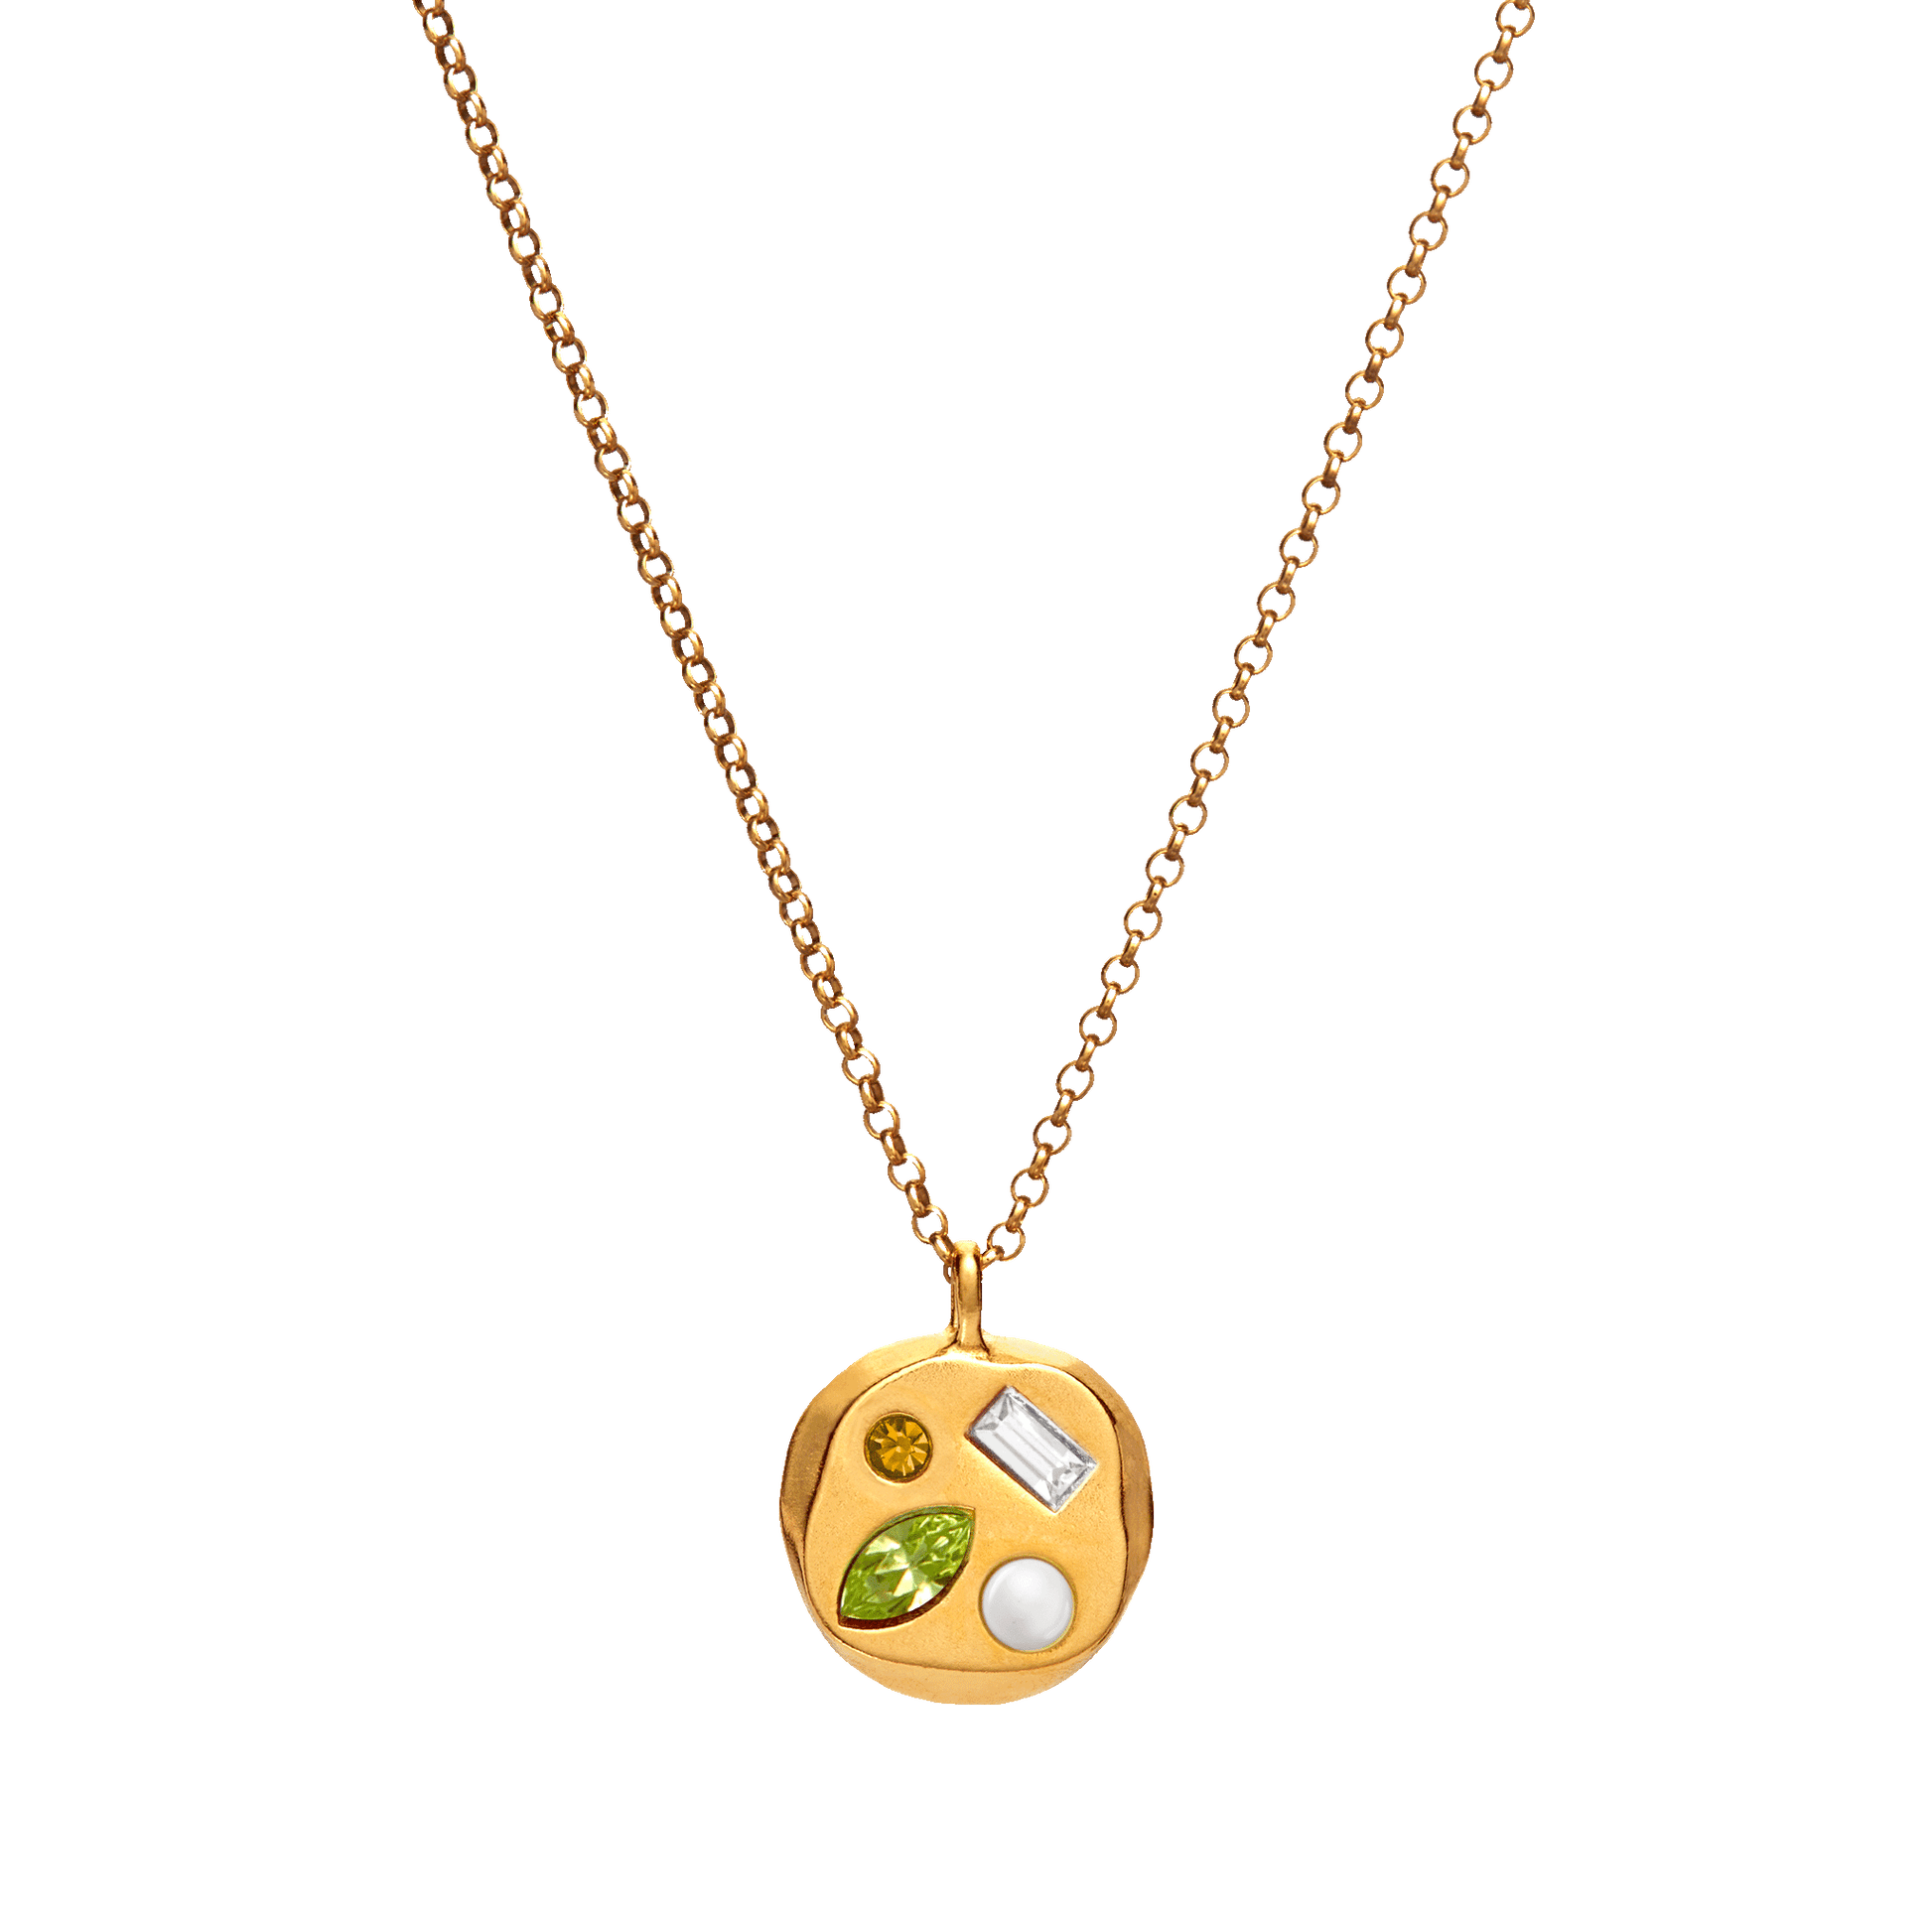 The August Tenth Pendant